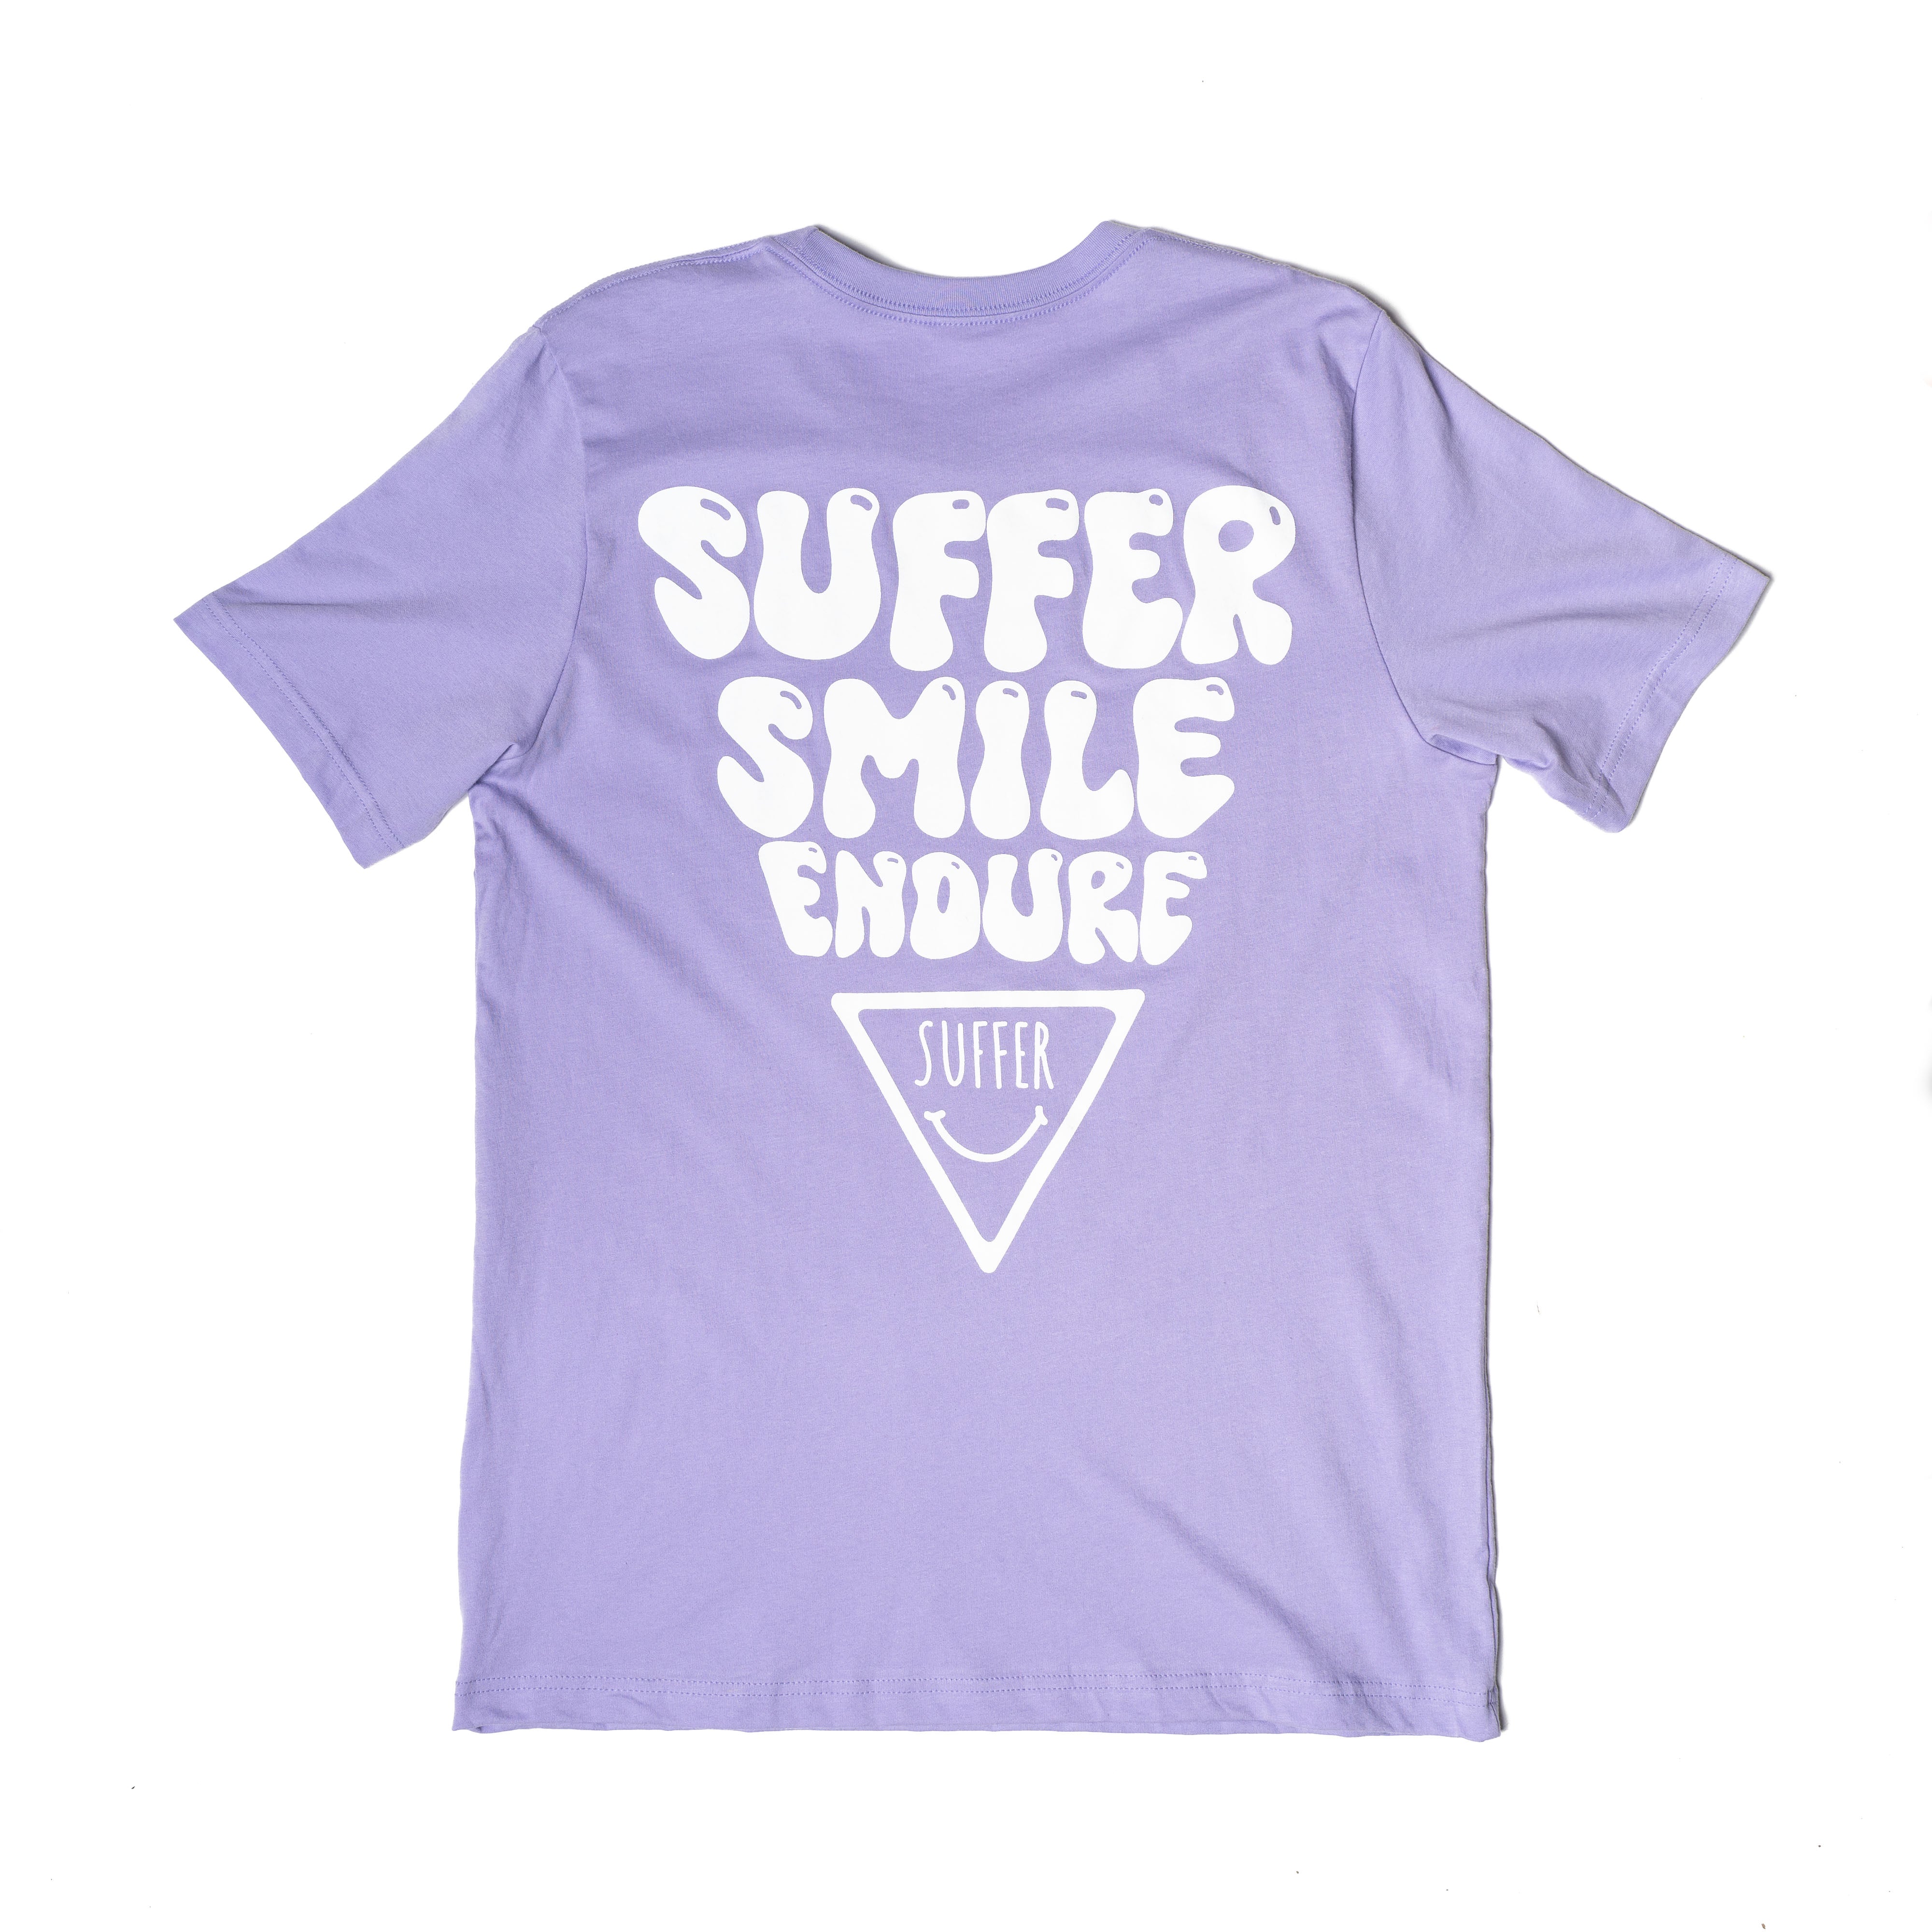 Suffer Smile Endure Spring Edition Tee